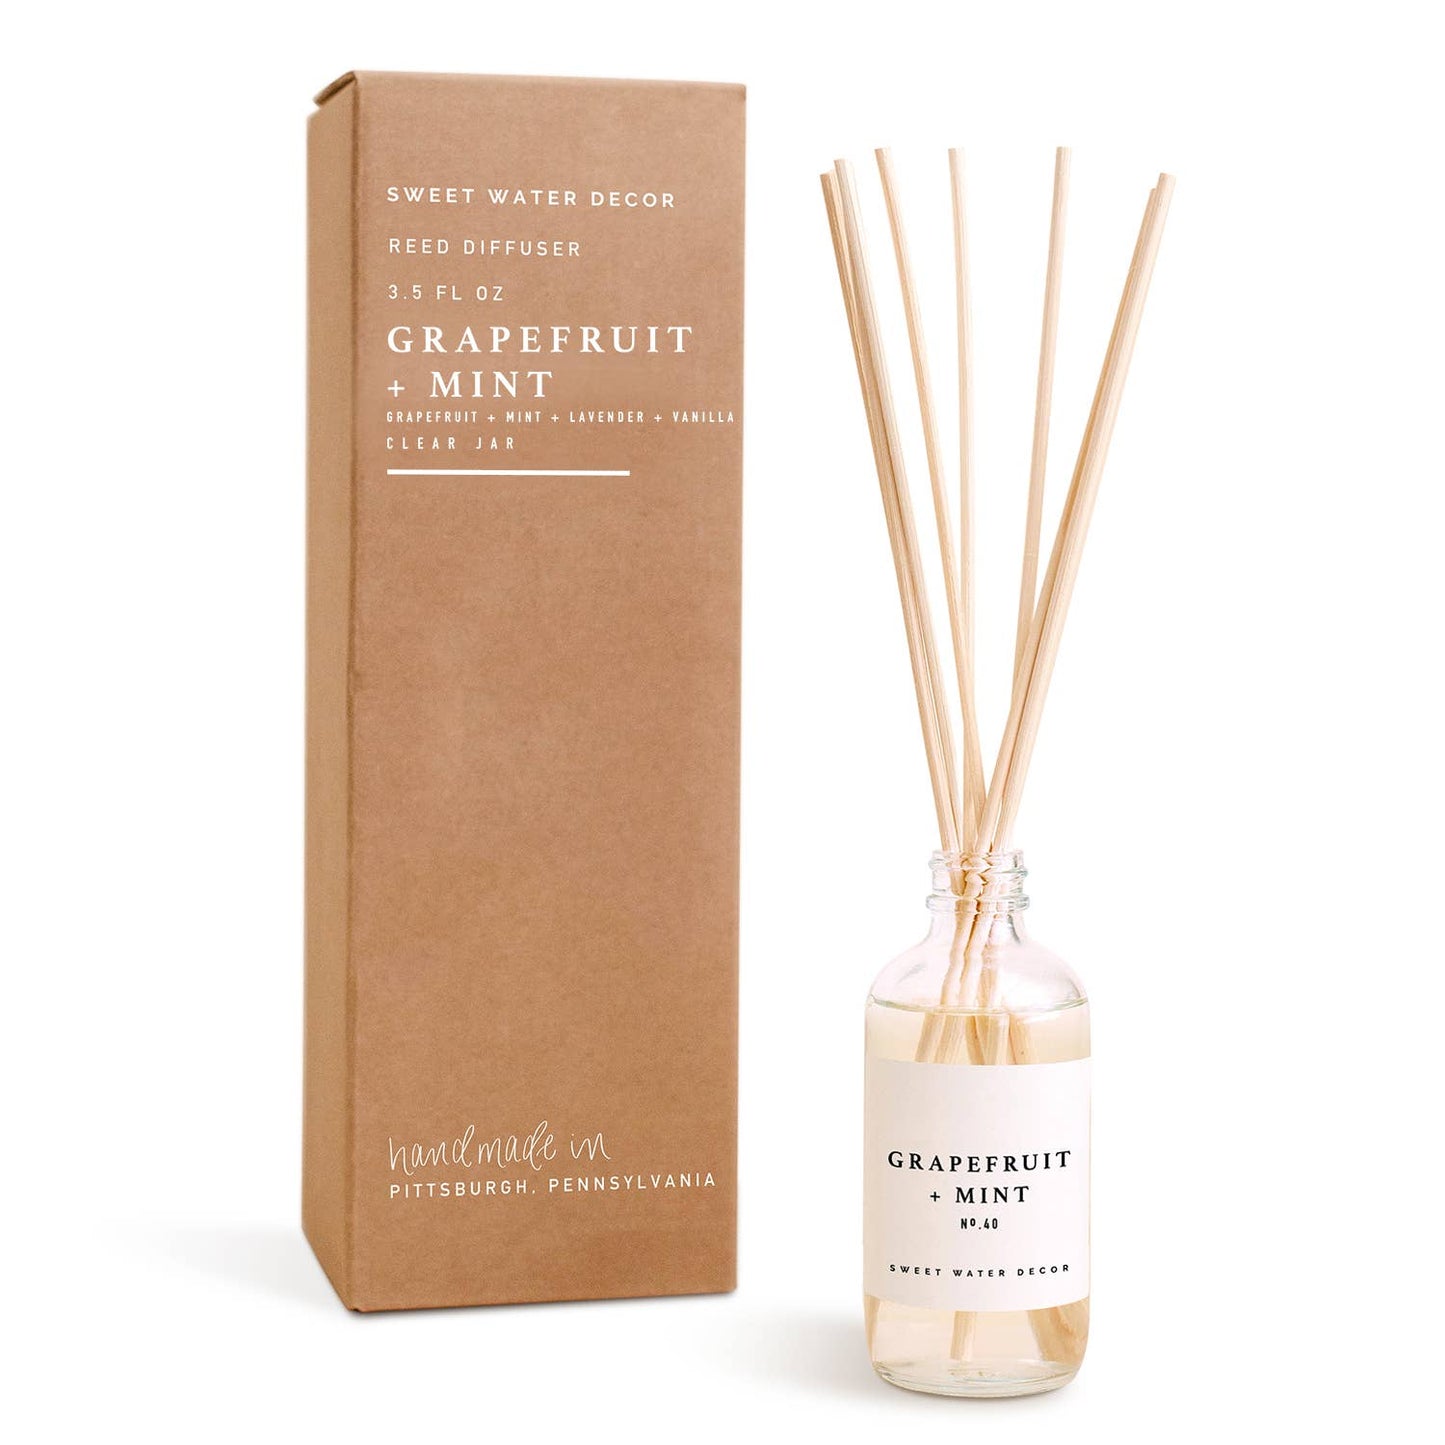 Grapefruit and Mint Reed Diffuser